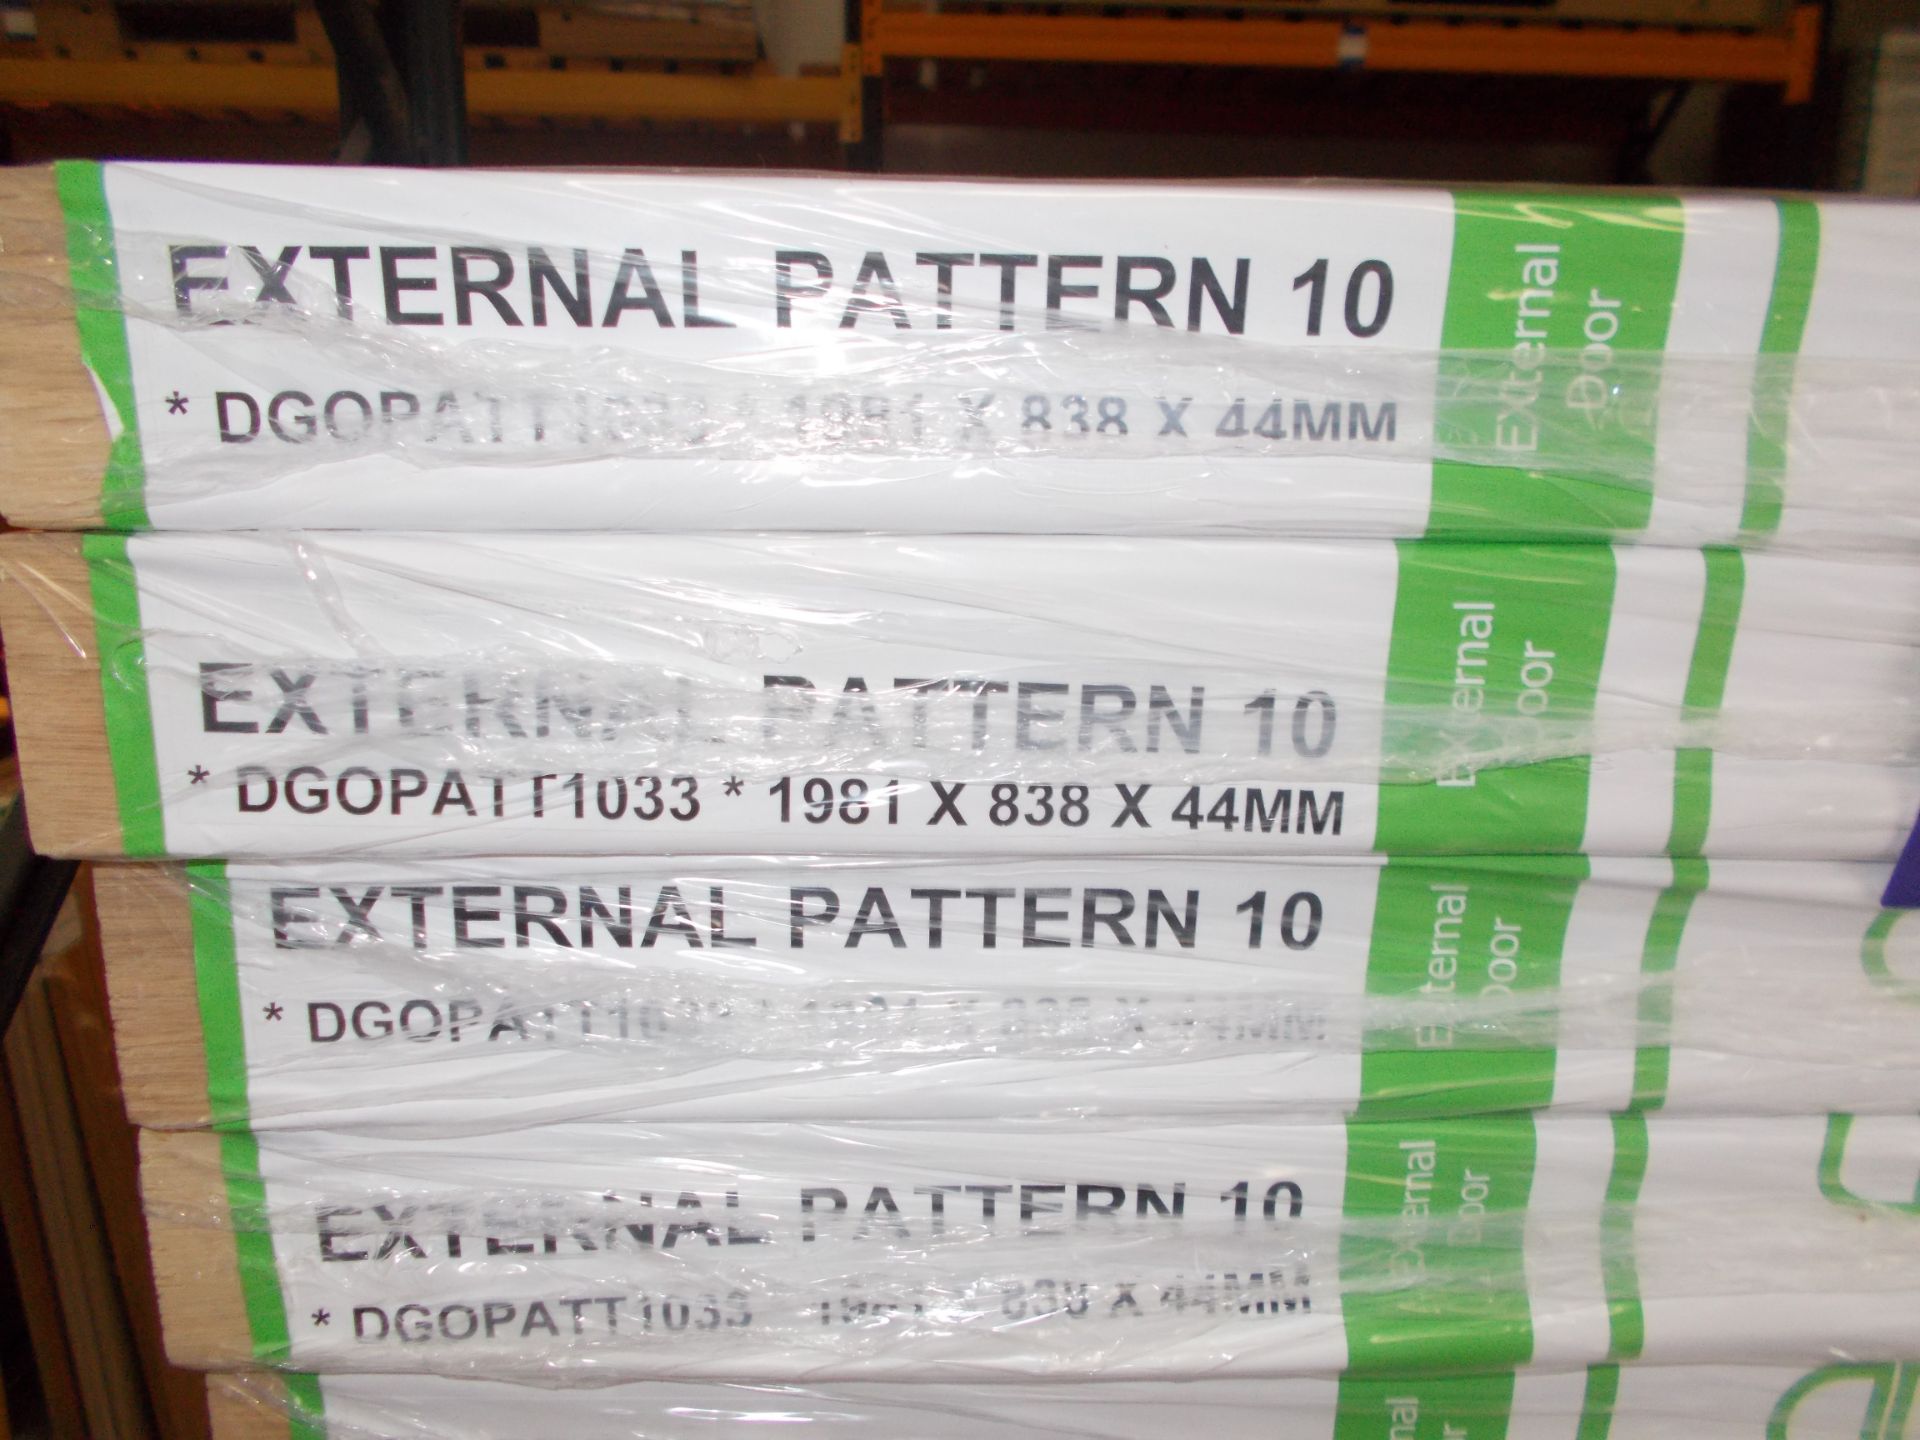 2 x External Pattern 10 External Door, DGOPATT1033, 1981mm x 838mm x 44mm – Lots to be handed out in - Image 3 of 3